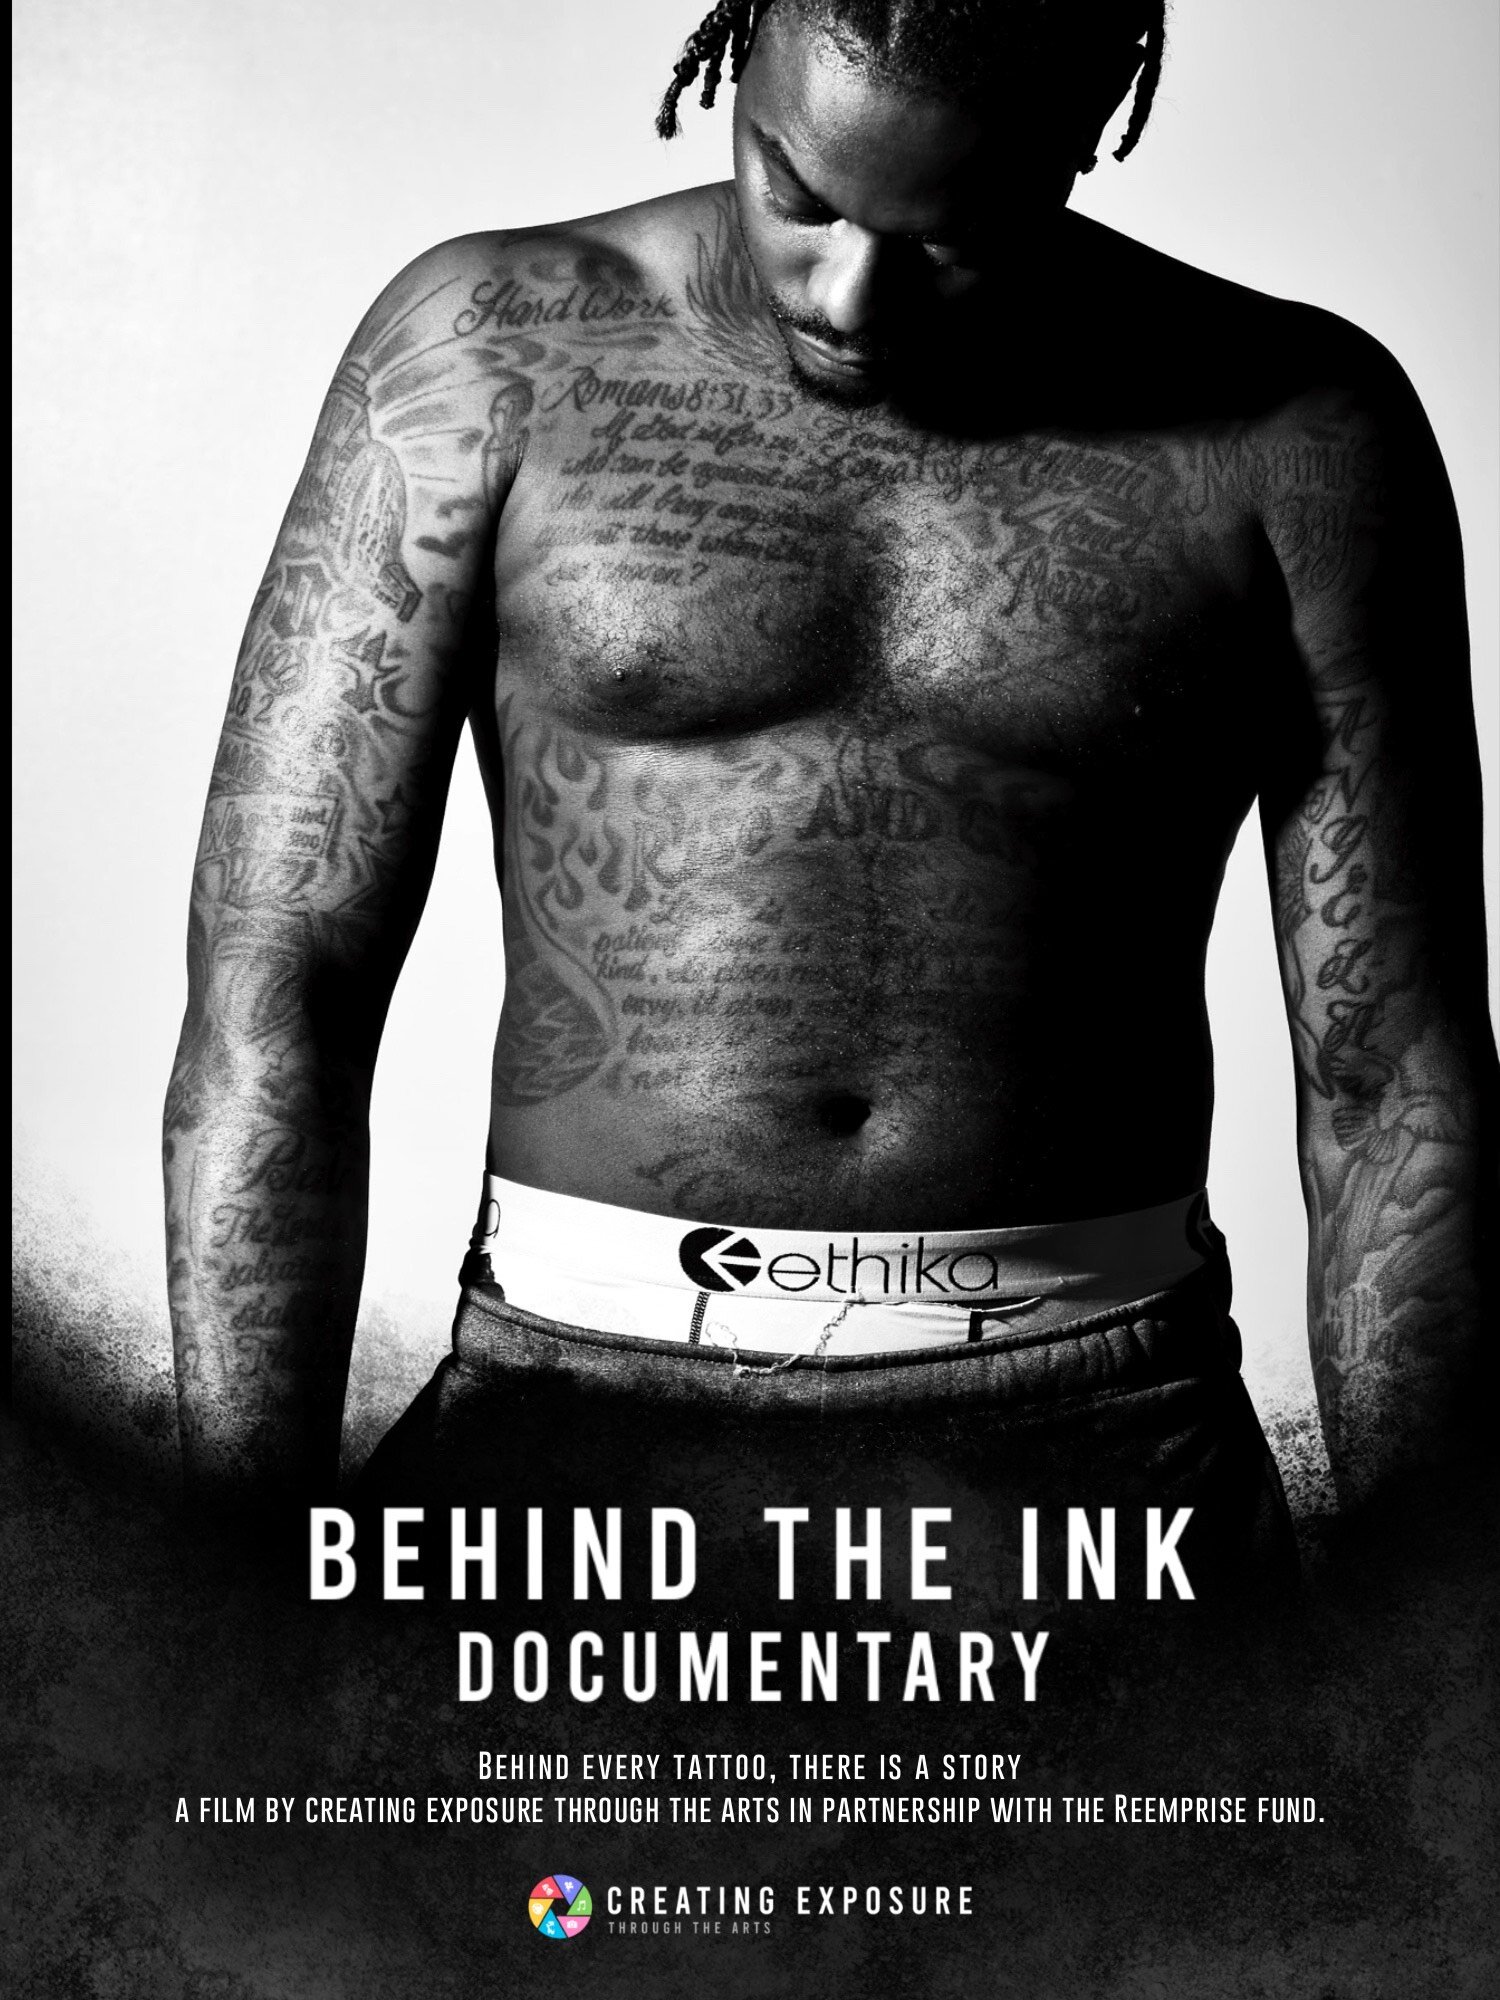 Behind The Ink Poster_Anthony Morrow.JPG